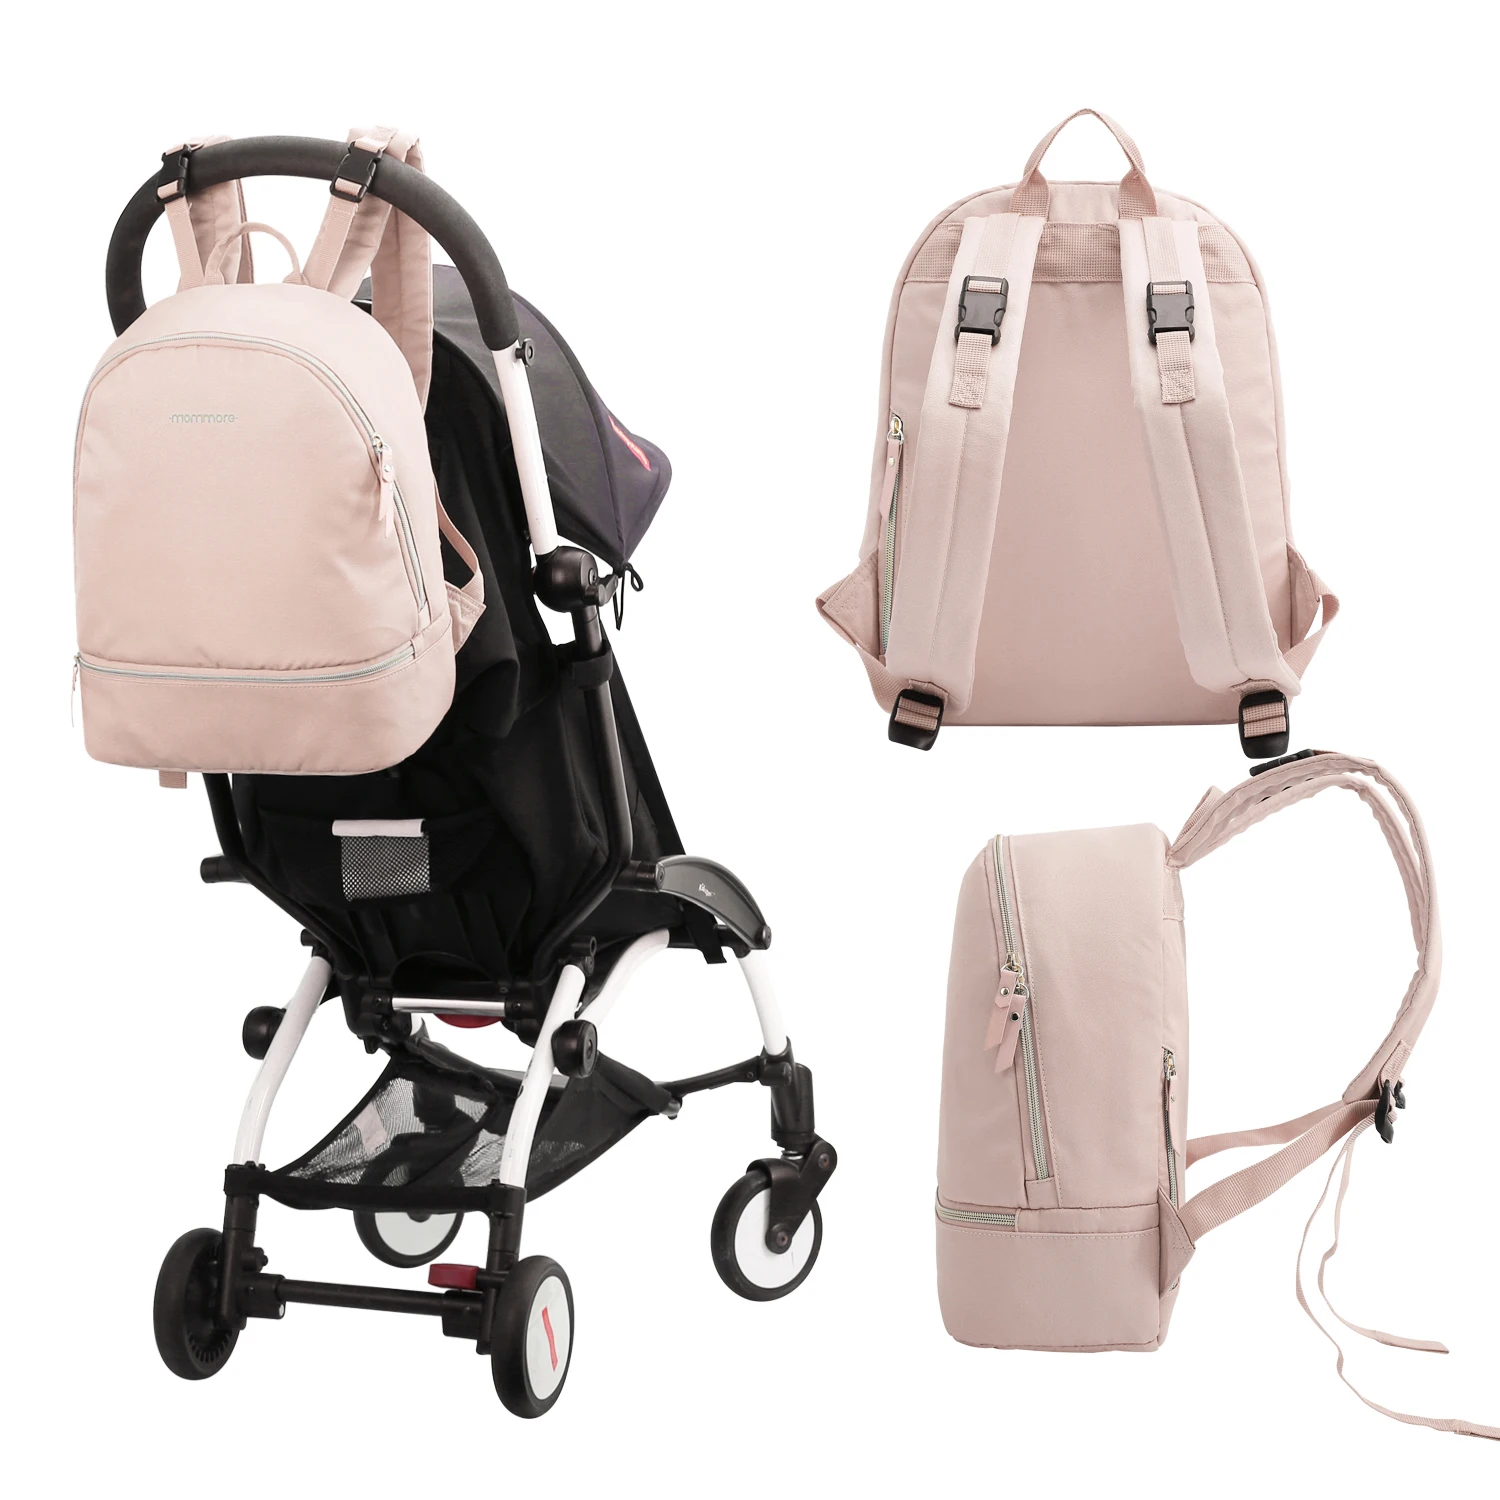 Baby Changing Bags & Handbag for Mommy - MOMMORE